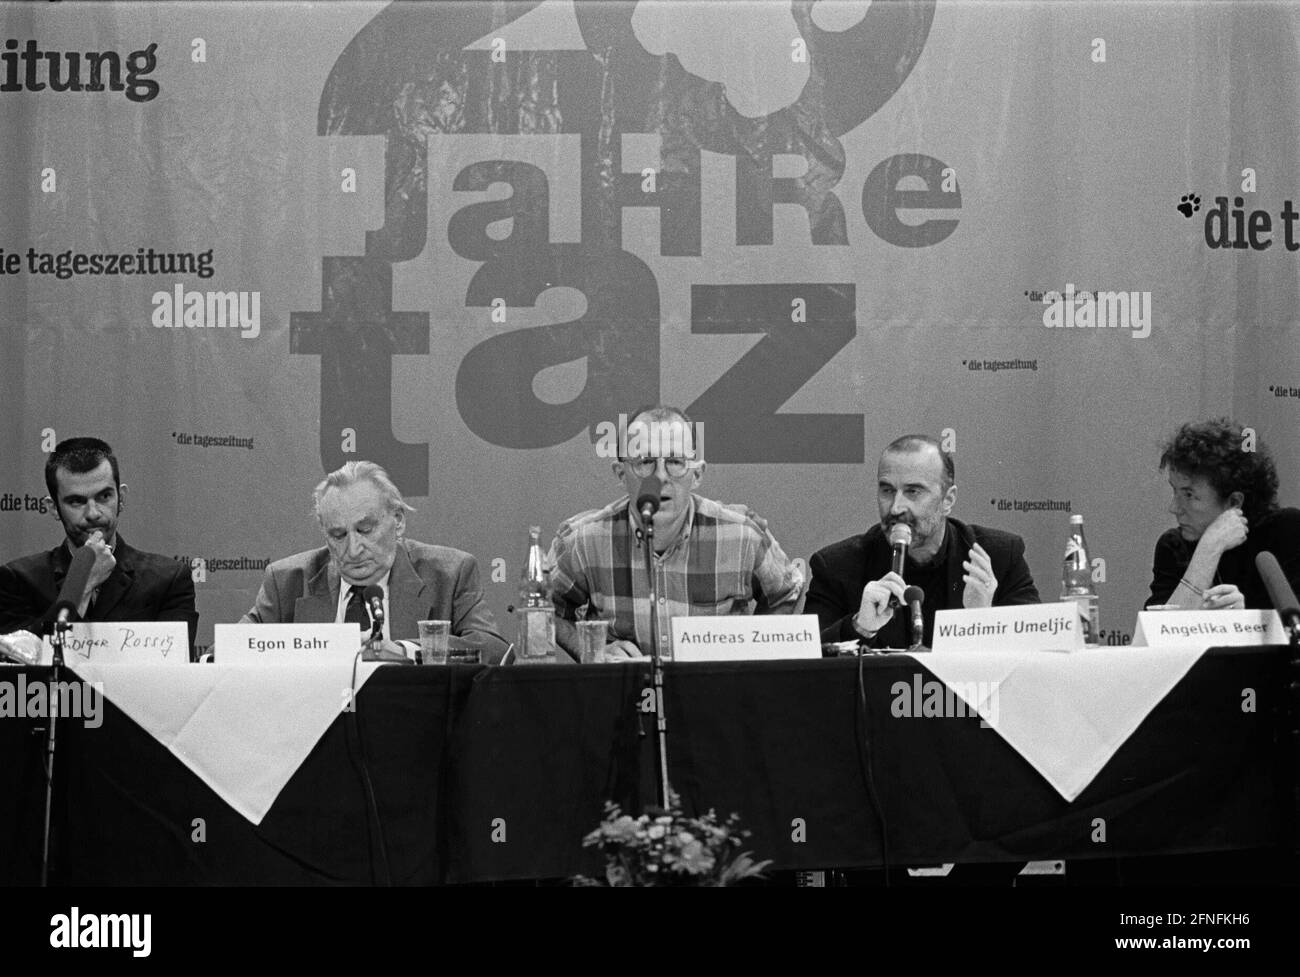 Panel discussion of the TAZ on the Kosovo war (20th TAZ birthday, Tacheles), (from left to right): Rossig / journalist, Egon Bahr / SPD, Andreas Zunach / moderator, Wladimir Umeljic, Angelika Beer / Buendnis 90 / Die Gruenen, Berlin-Mitte, 18.04.1999, [automated translation] Stock Photo